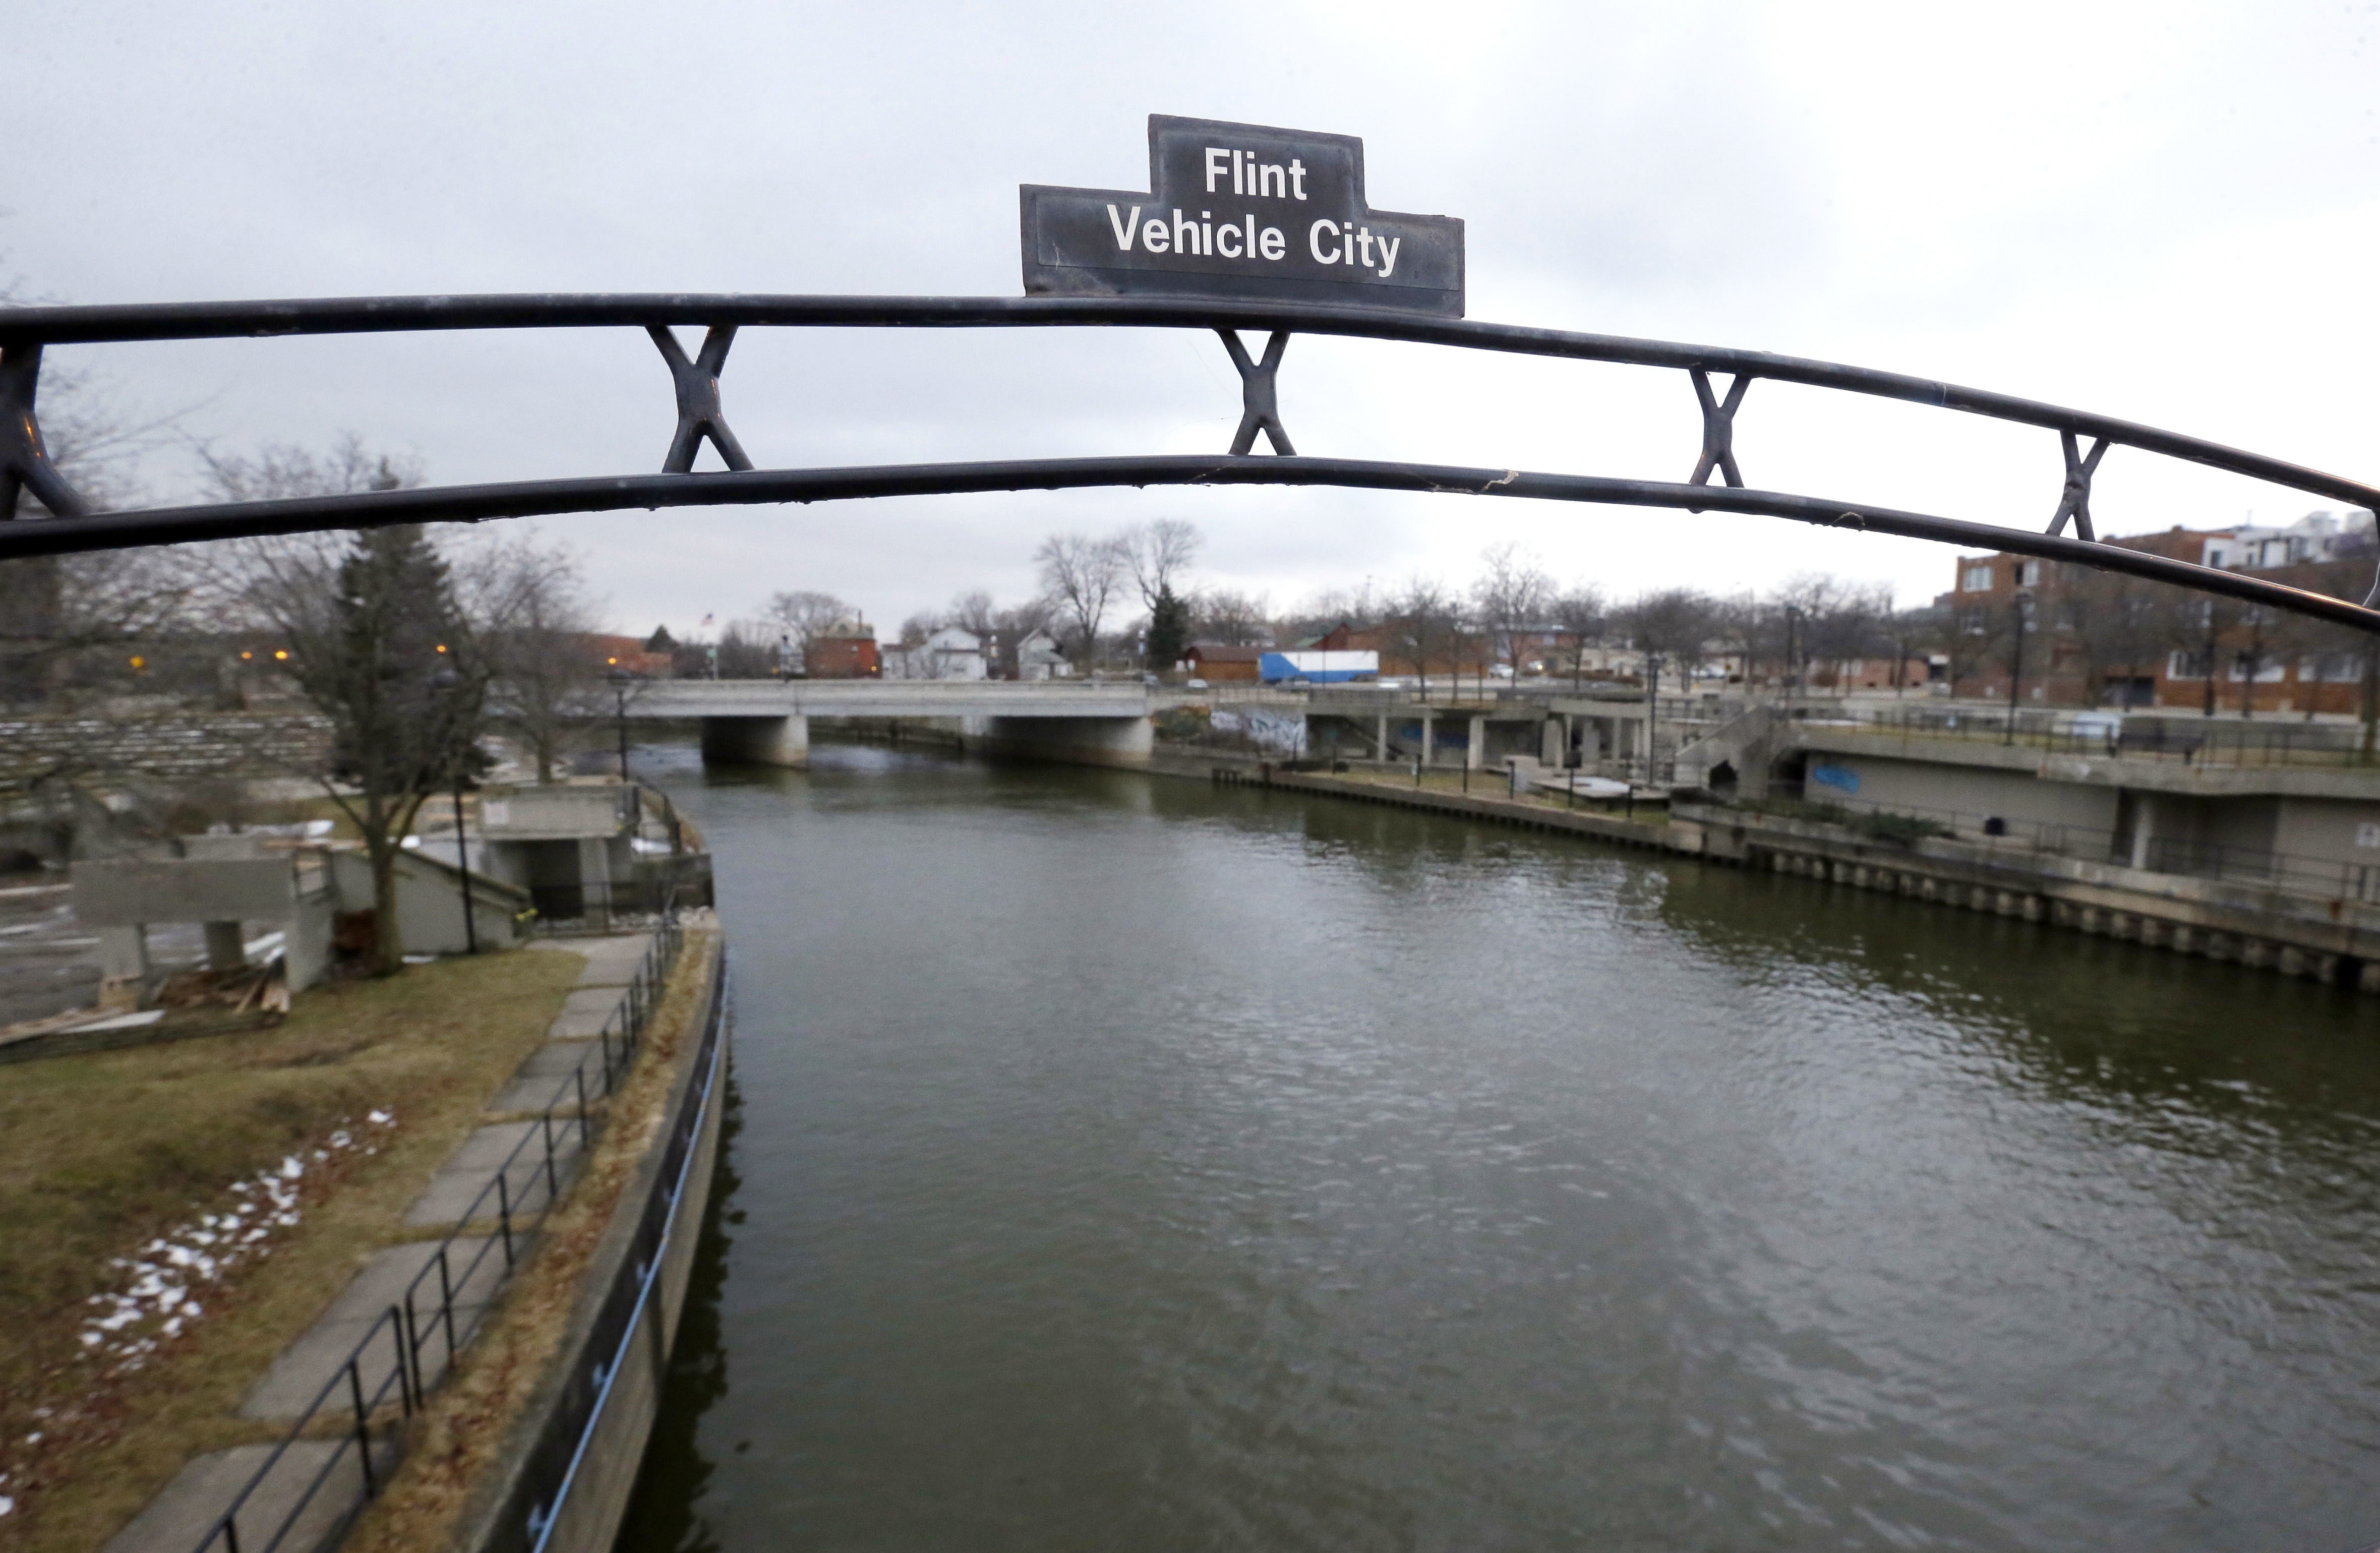 An estimated 8,000 children in Flint, Mich., were exposed to lead after the city switched water sources from Lake Huron to the Flint River, shown above, which one public health expert says will lead to $400 million in societal costs. (Carlos Osorio—AP)